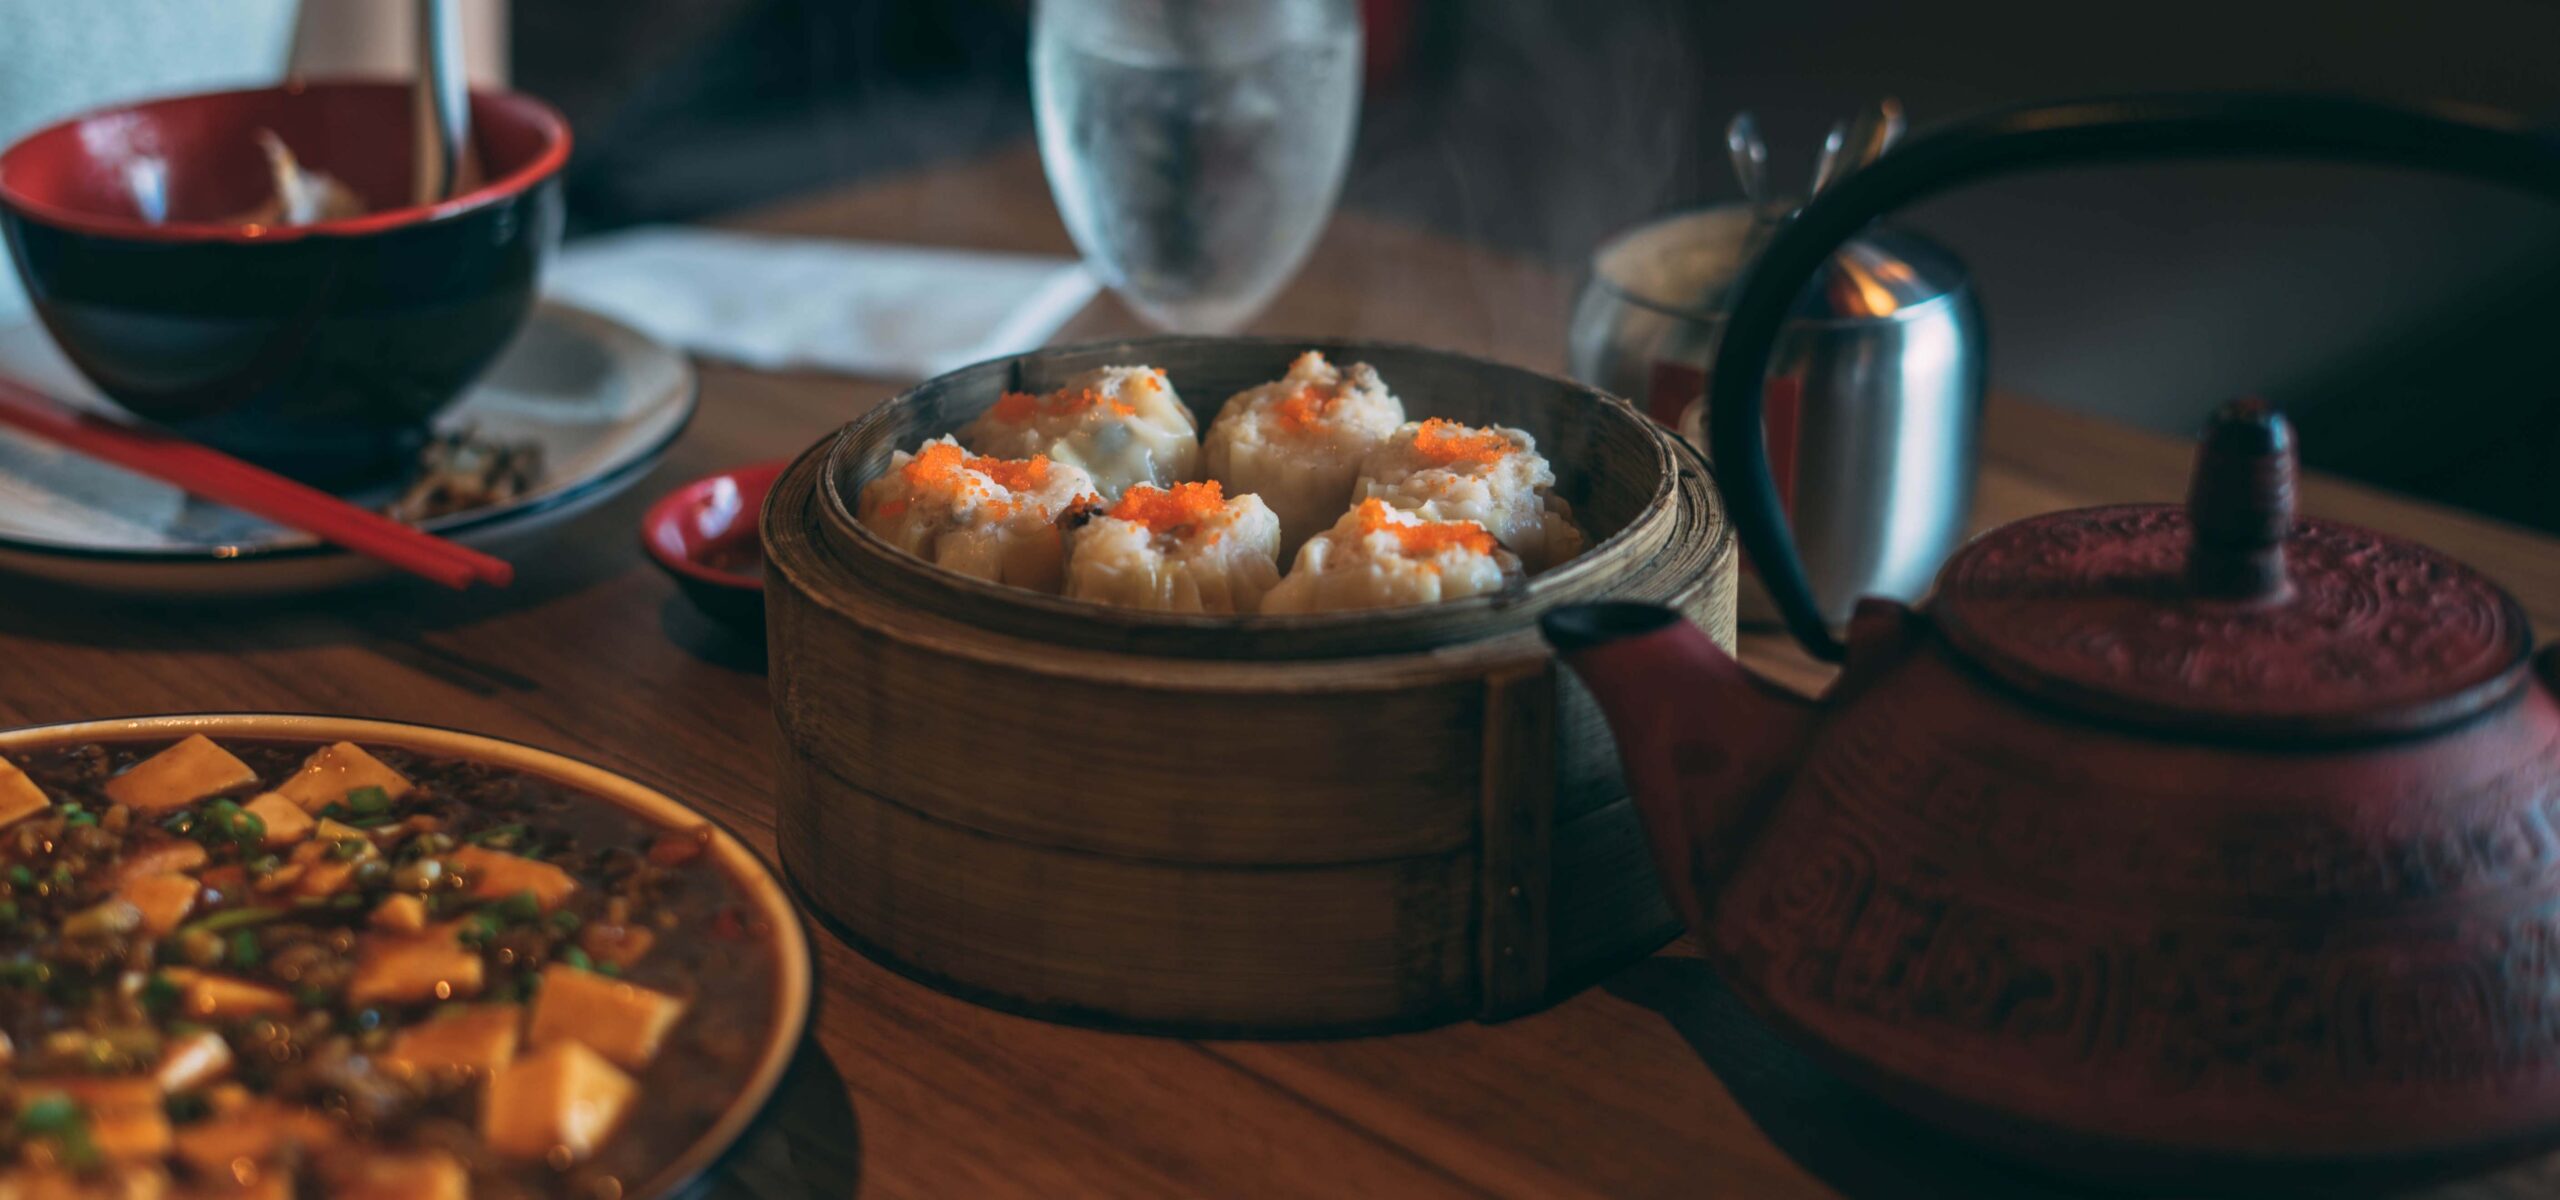 Steamer with dumplings on a table with a tea pot.